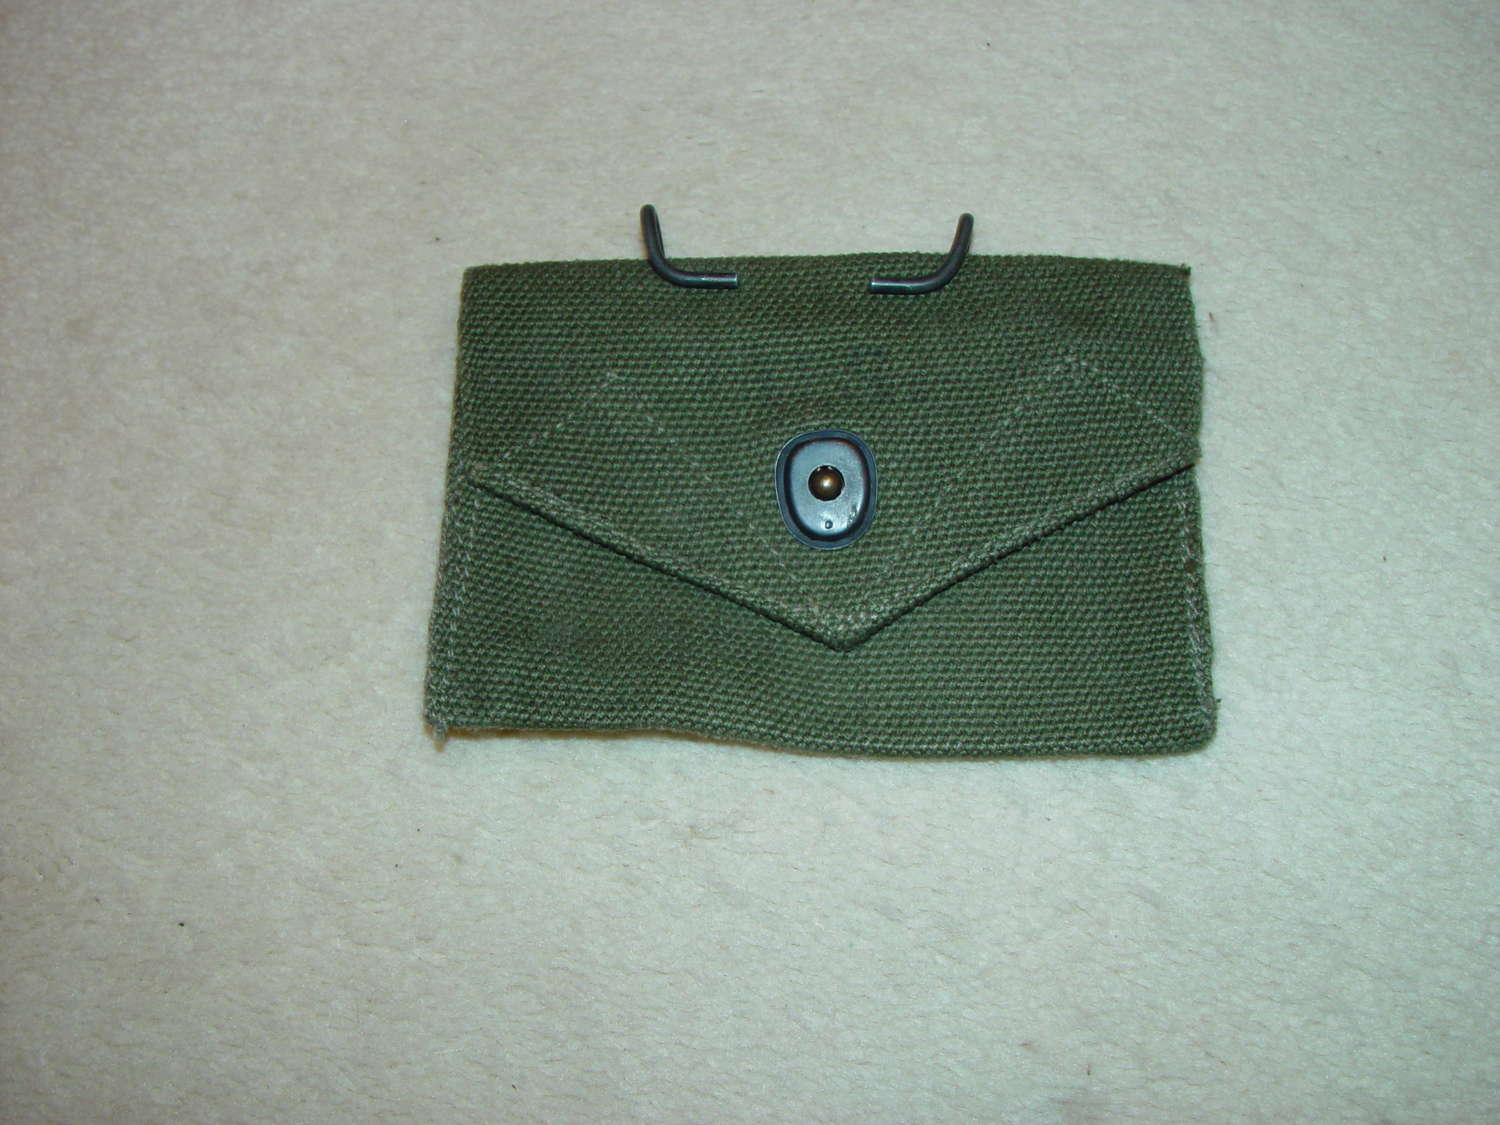 US Army first aid pouch in OD#7